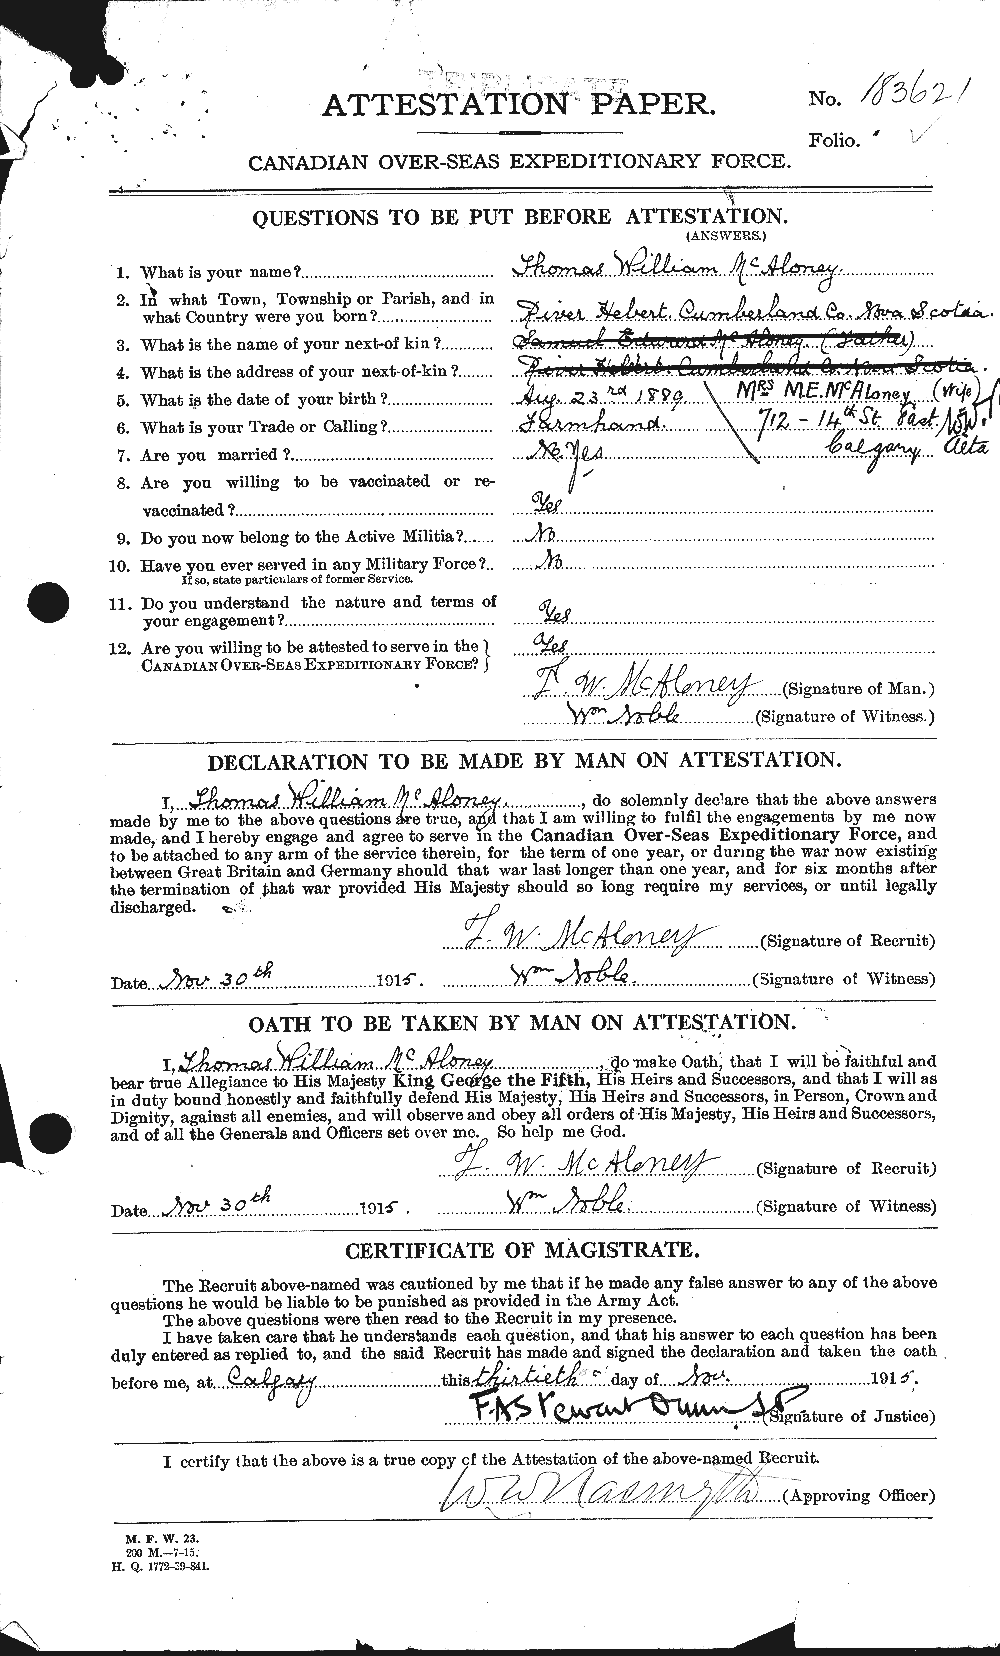 Personnel Records of the First World War - CEF 516049a